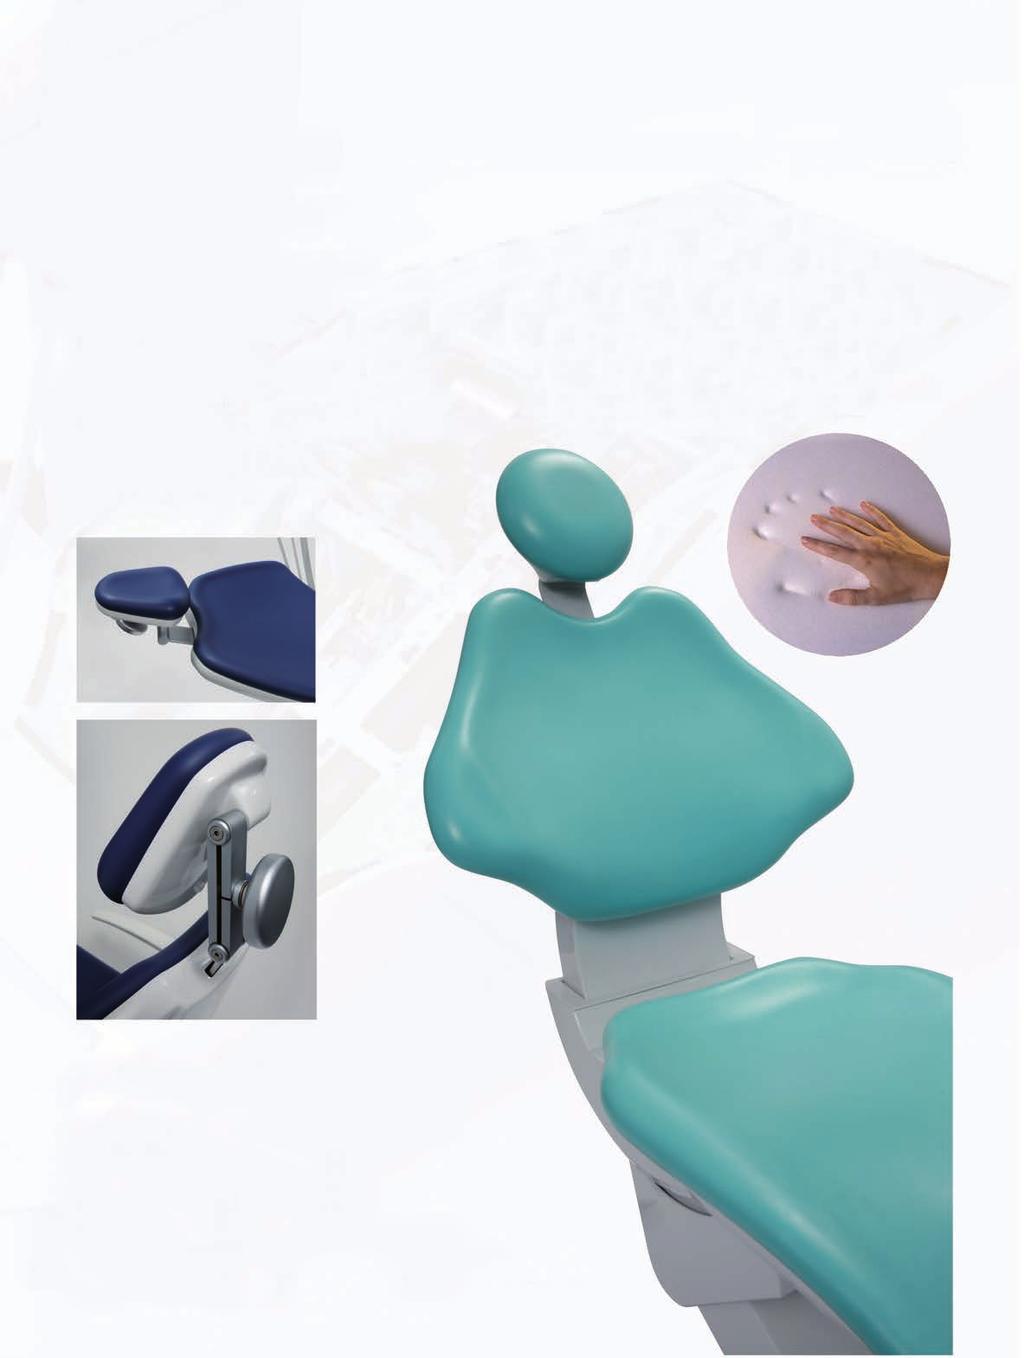 Design Relaxation for your patients Correct Placement for Treatment The Ritter Contact line chairs incorporate a range of features to promote correct positioning for any patient size or treatment